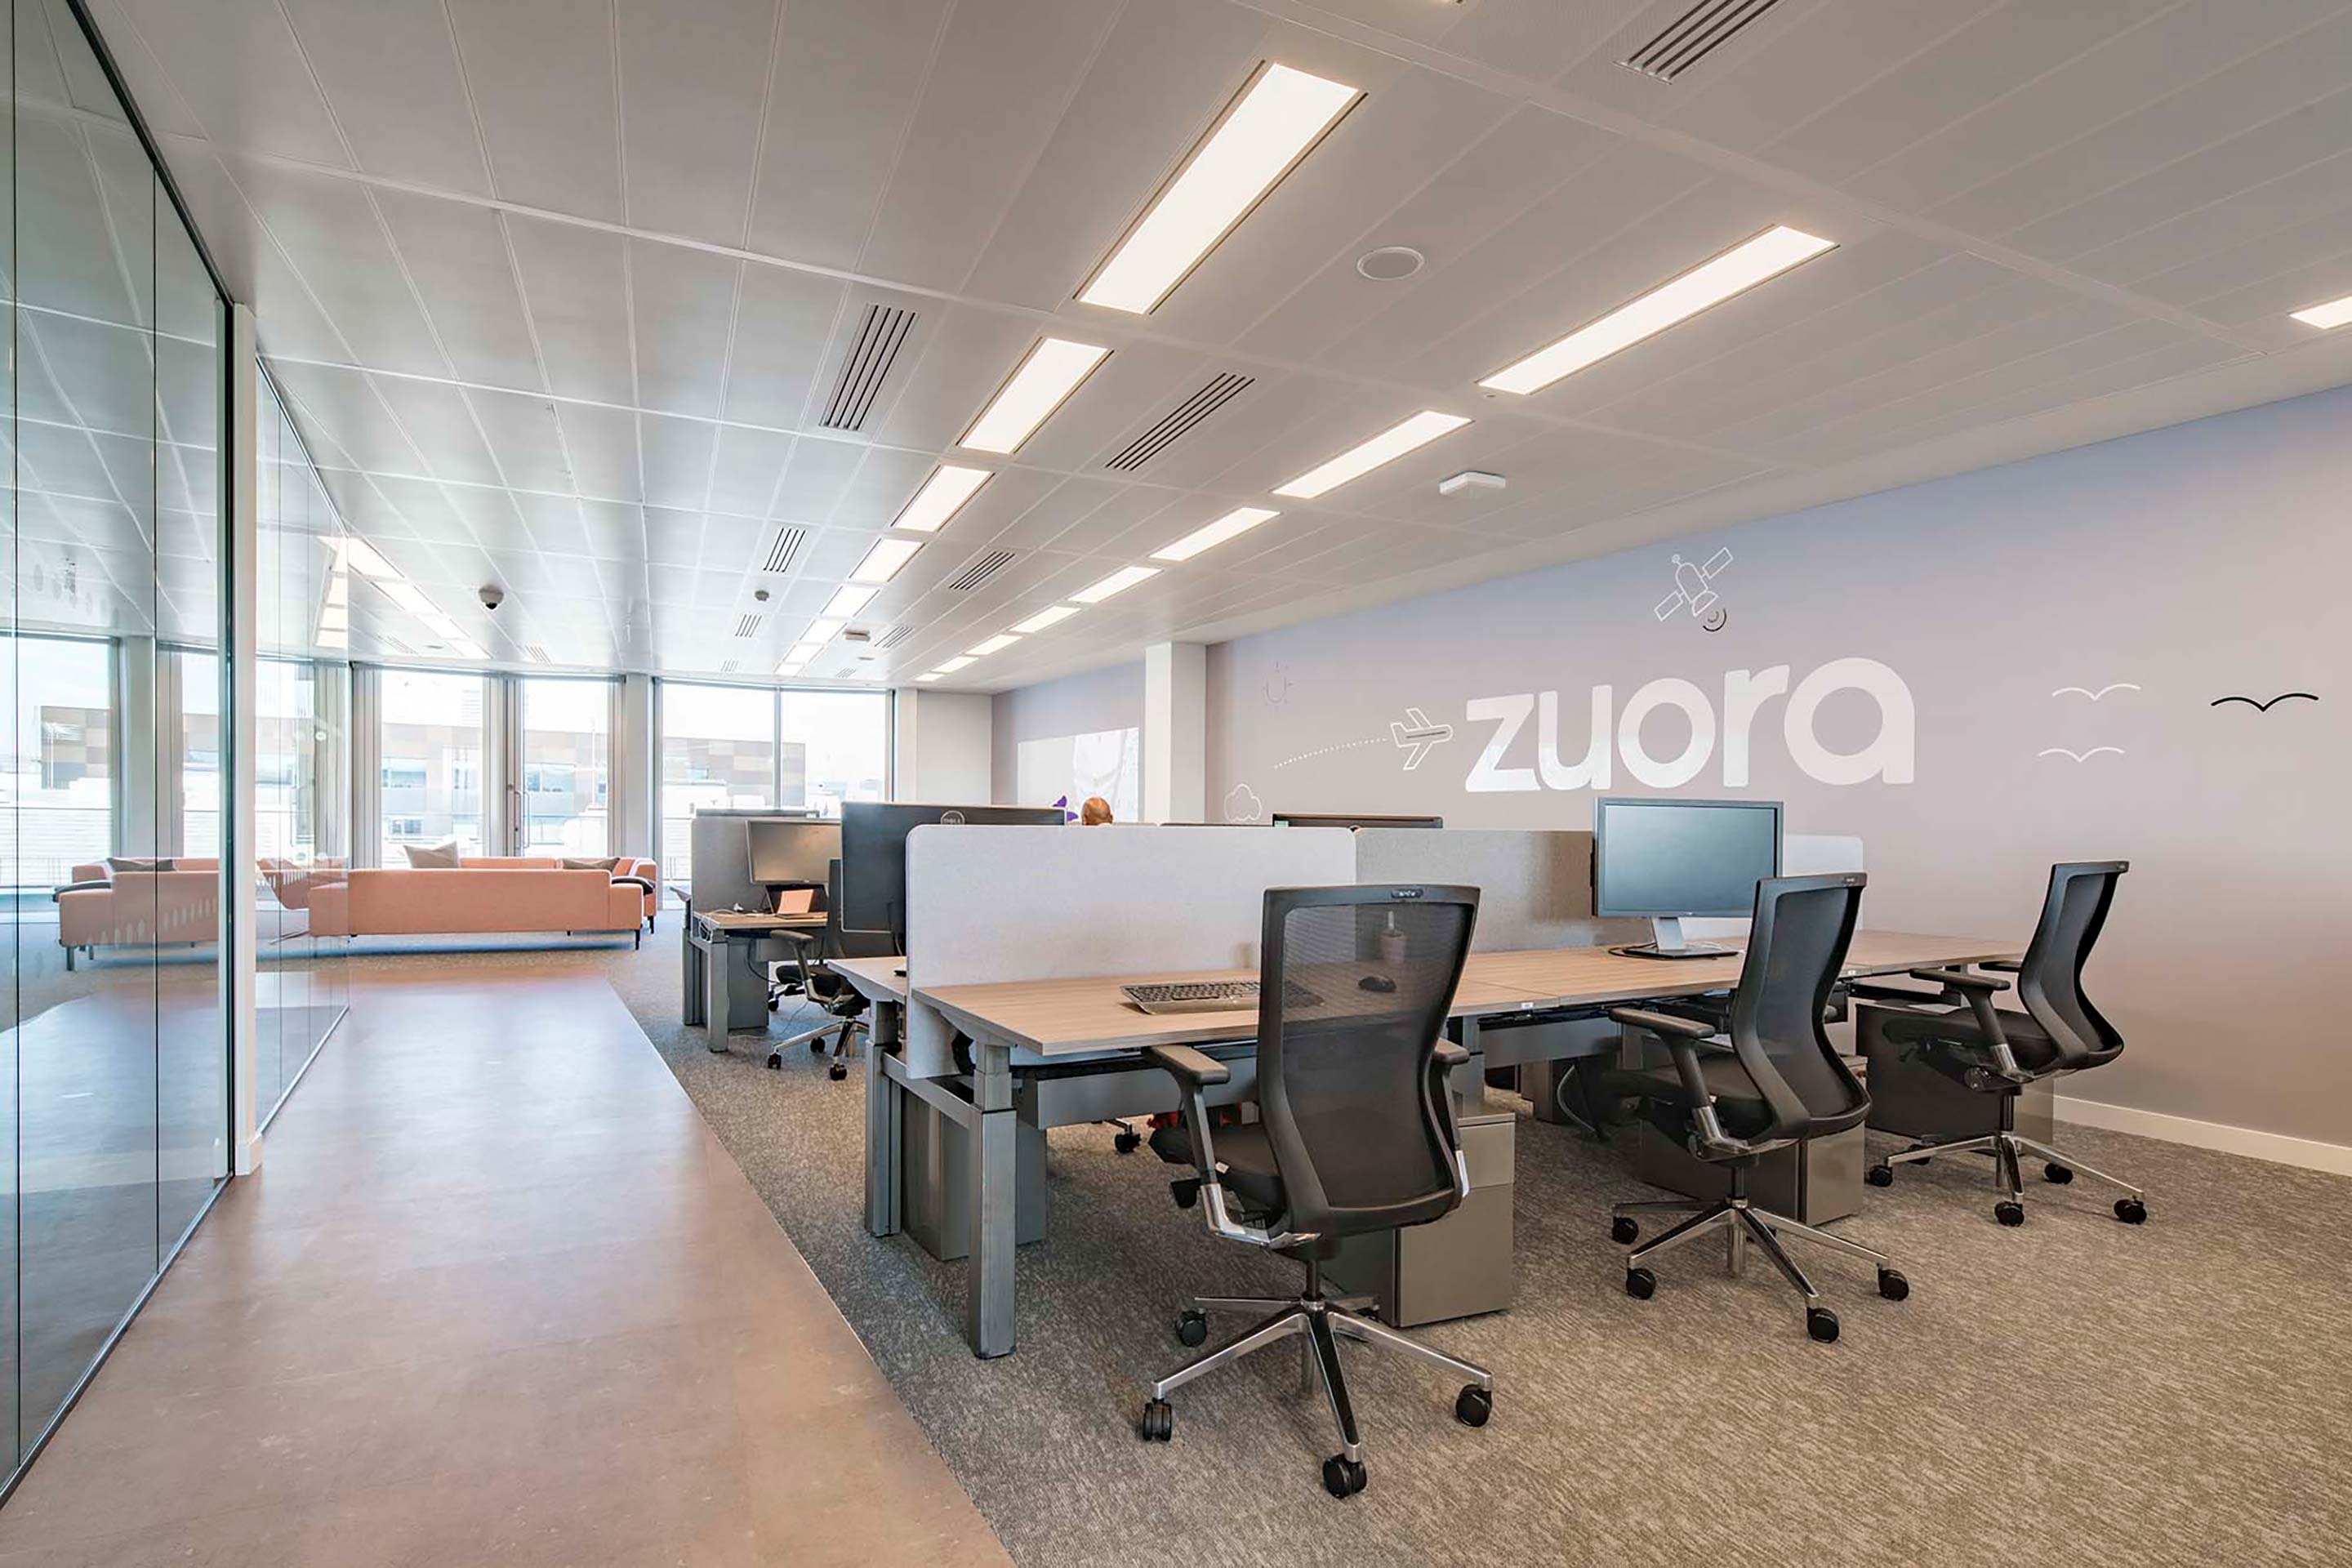 Some of Zuora's work stations